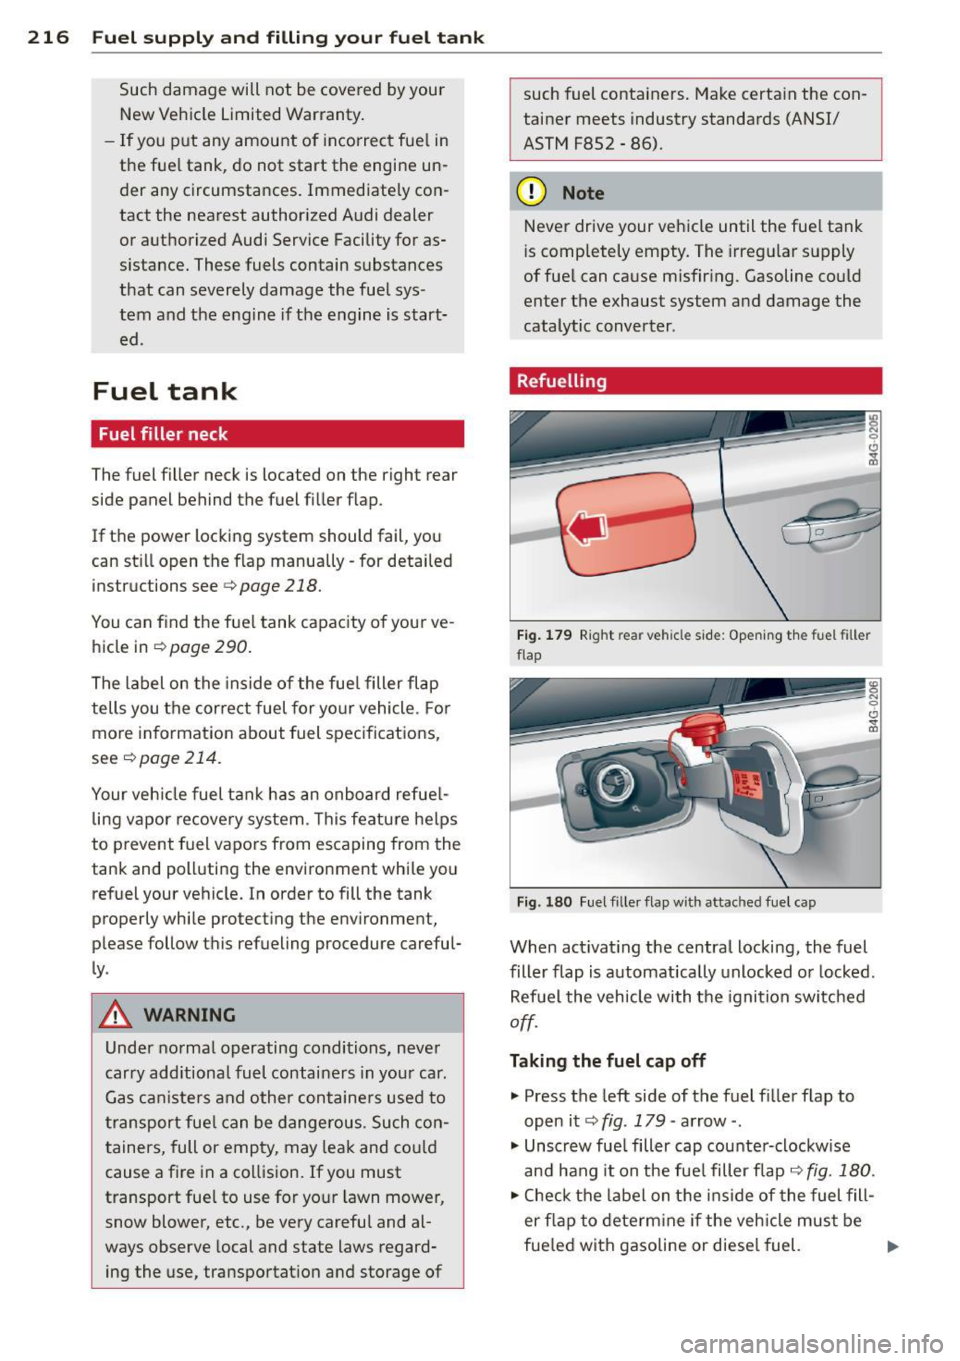 AUDI A6 2015  Owners Manual 216  Fuel supply and filling  your  fuel  tank 
Such  damage  will  not  be  covered  by your 
New  Vehicle  Limited  Warranty. 
- If you  p ut  any  amount  of  incorrect fuel in 
the  fue l tank,  d